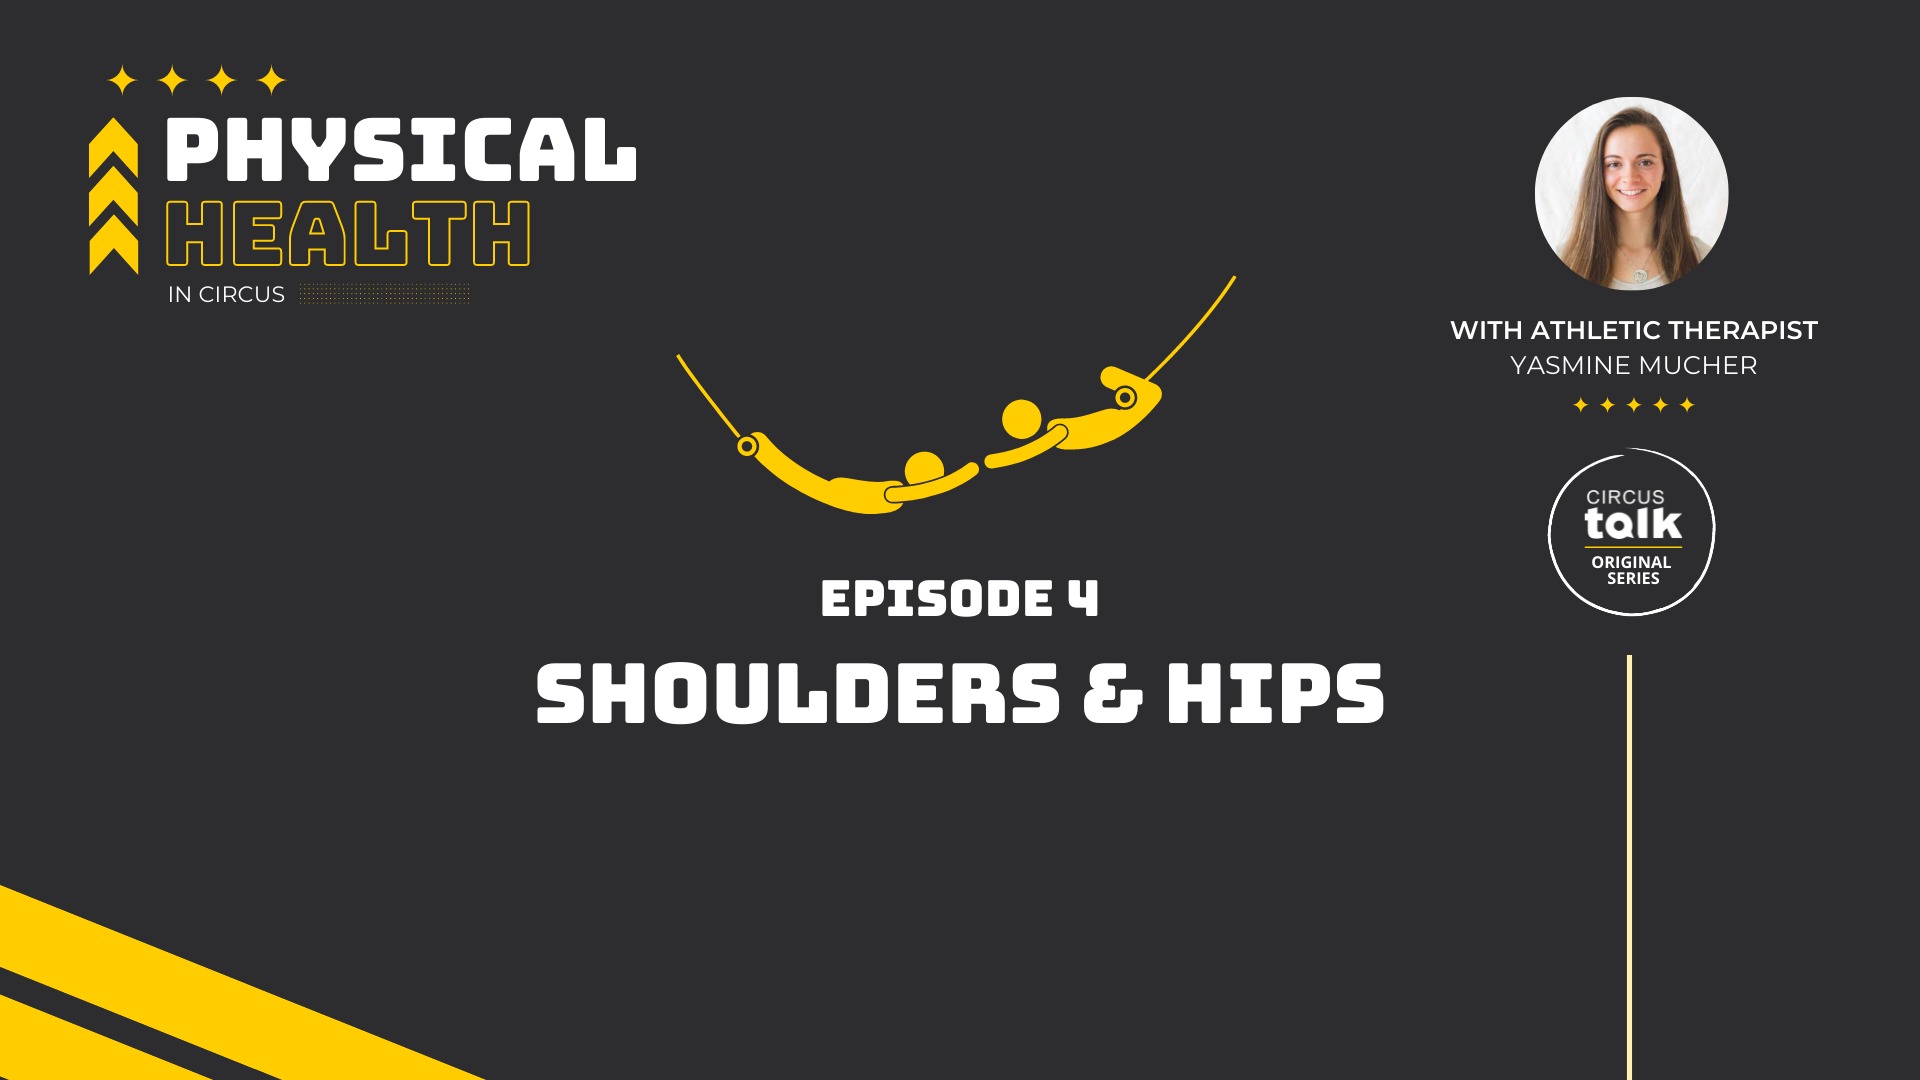 <em>PRO Exclusive</em>: Physical Health in Circus with Yasmine Mucher – Shoulders & Hips